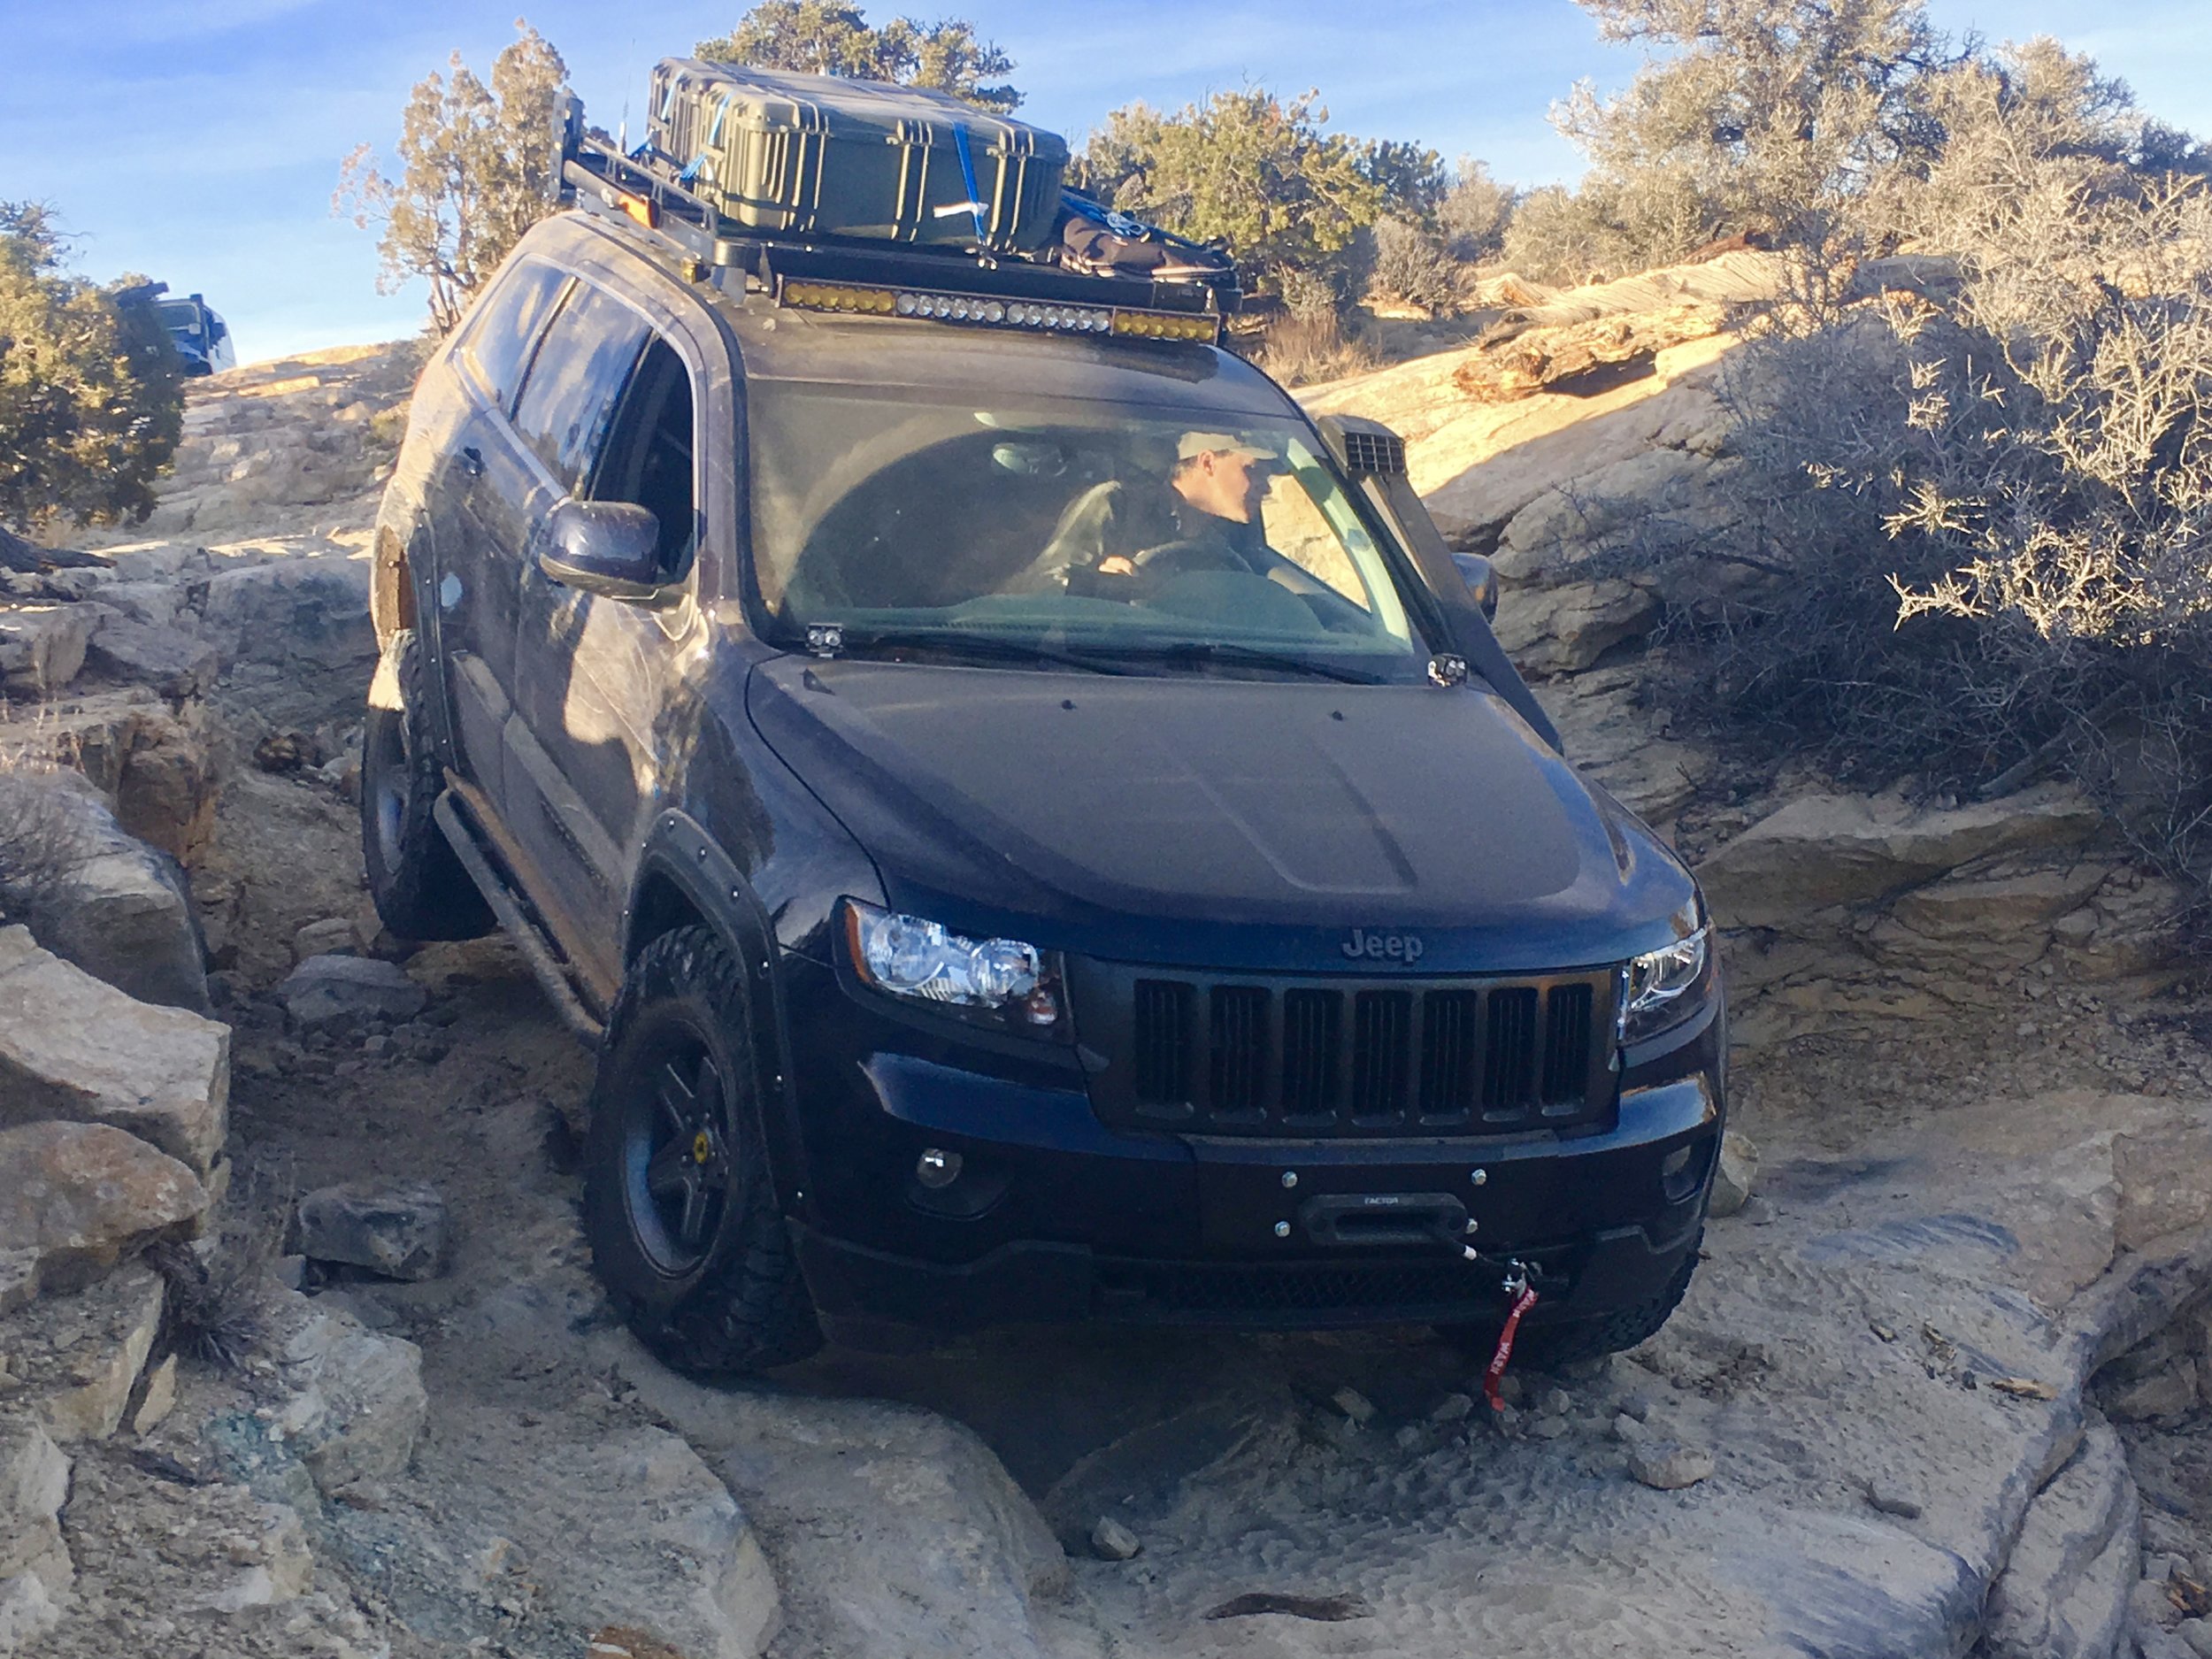 BMW X5 E53 Off-Road Build With A Snorkel Rides High On All-Terrain Tires